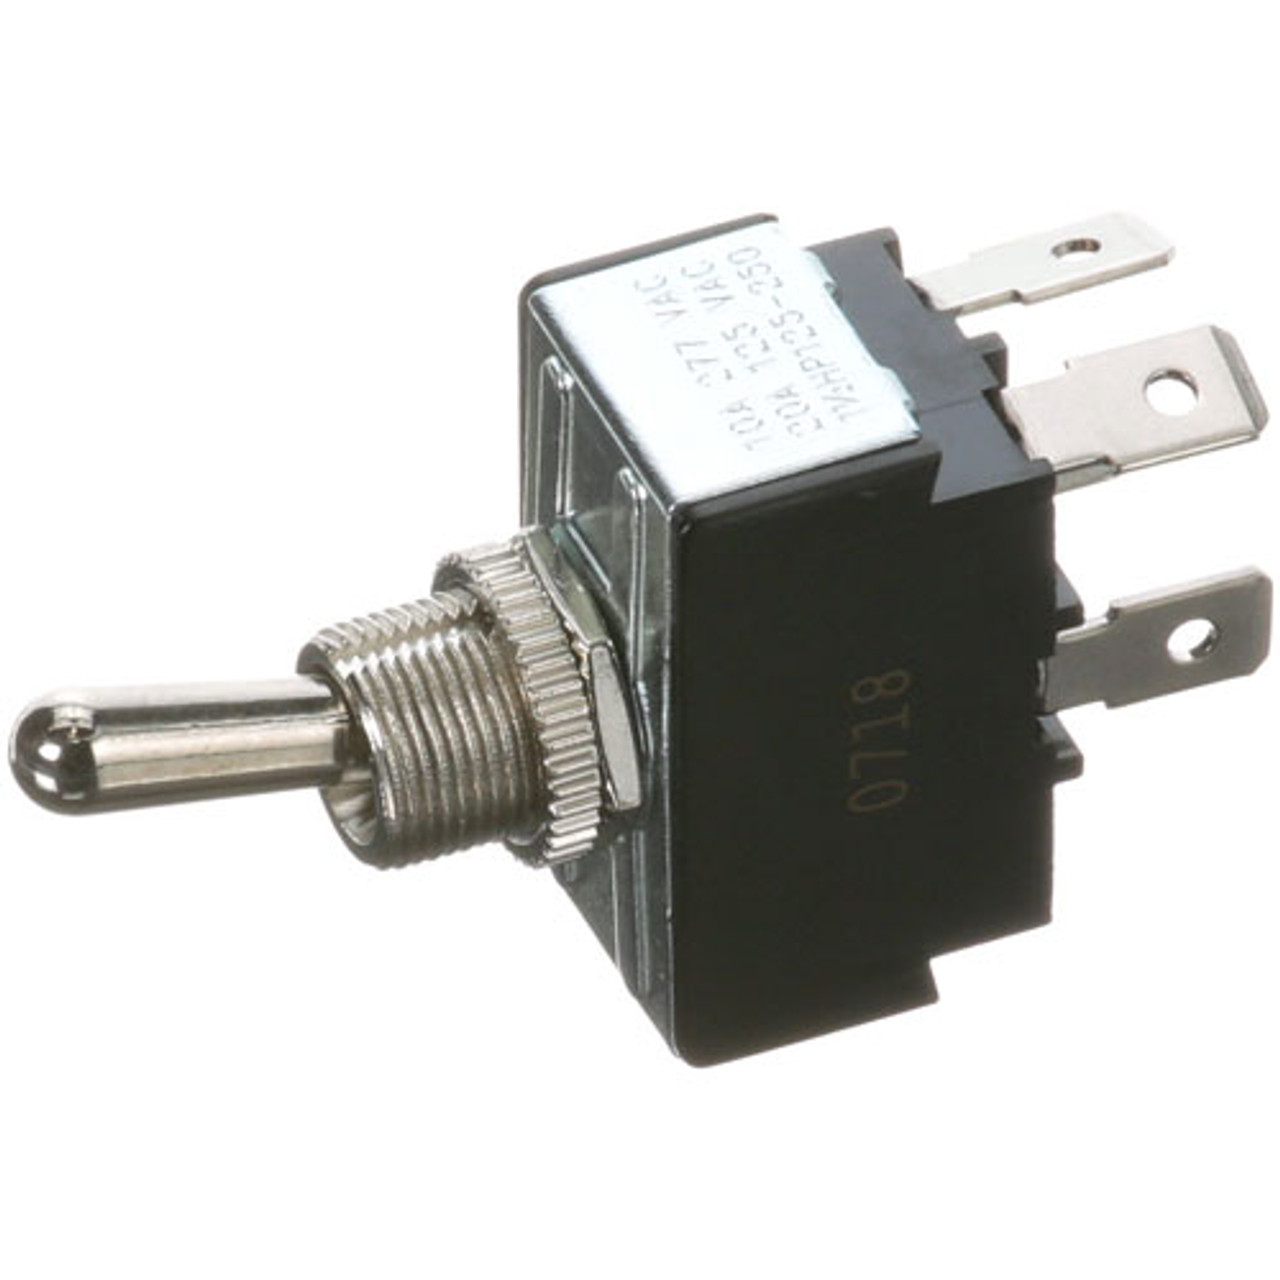 Toggle Switch 1/2 Dpst - Replacement Part For Hobart 087711-148-1